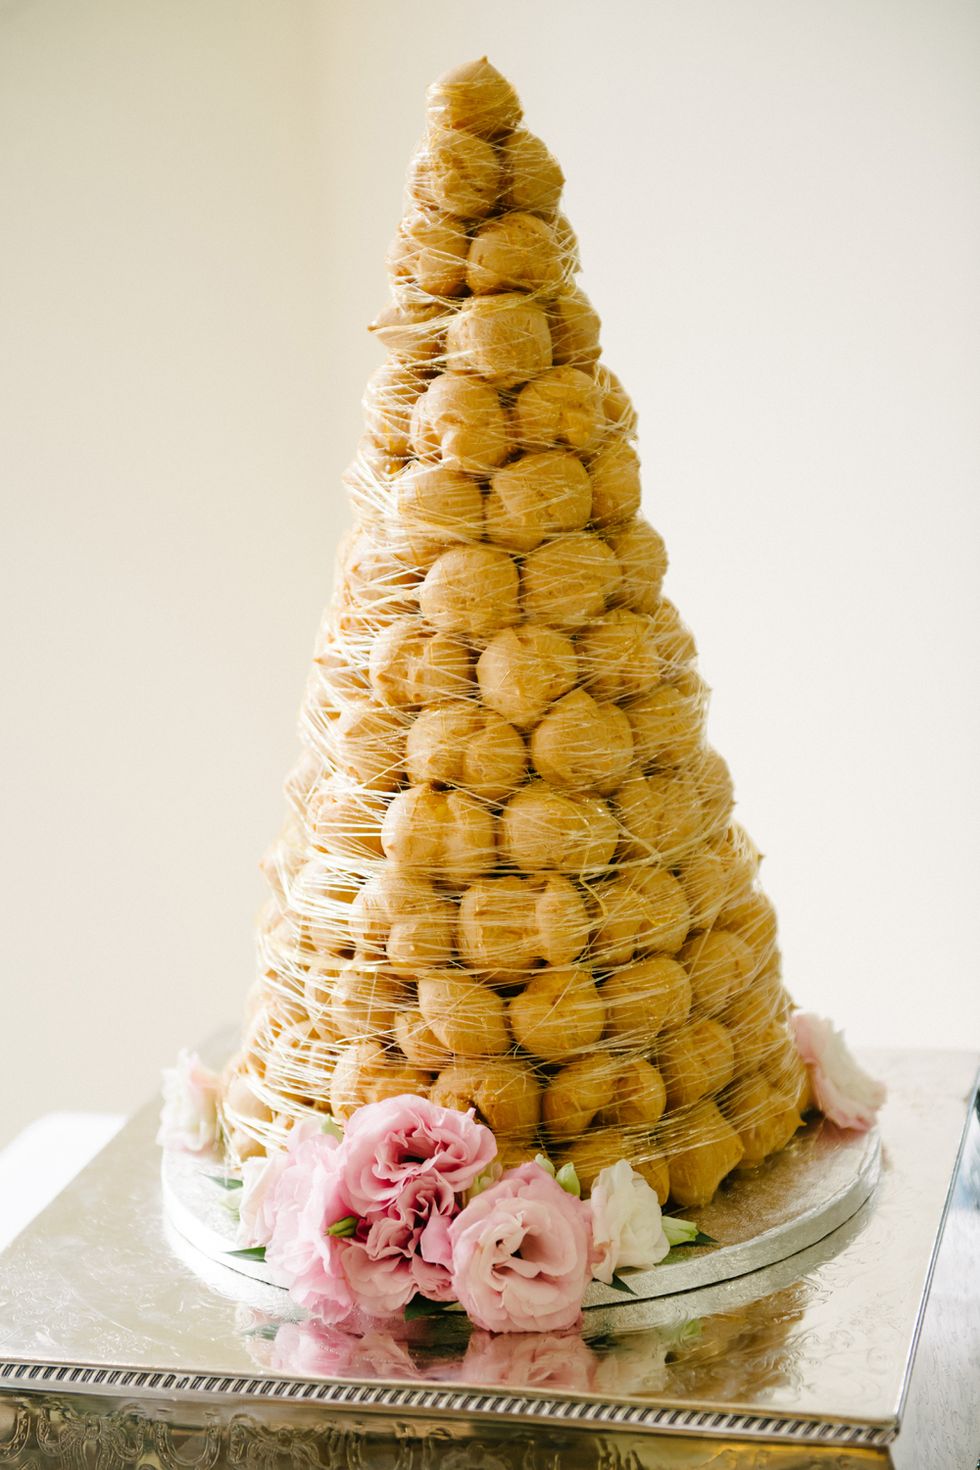 Croquembouche Tower from Fancy That Wedding Cakes
